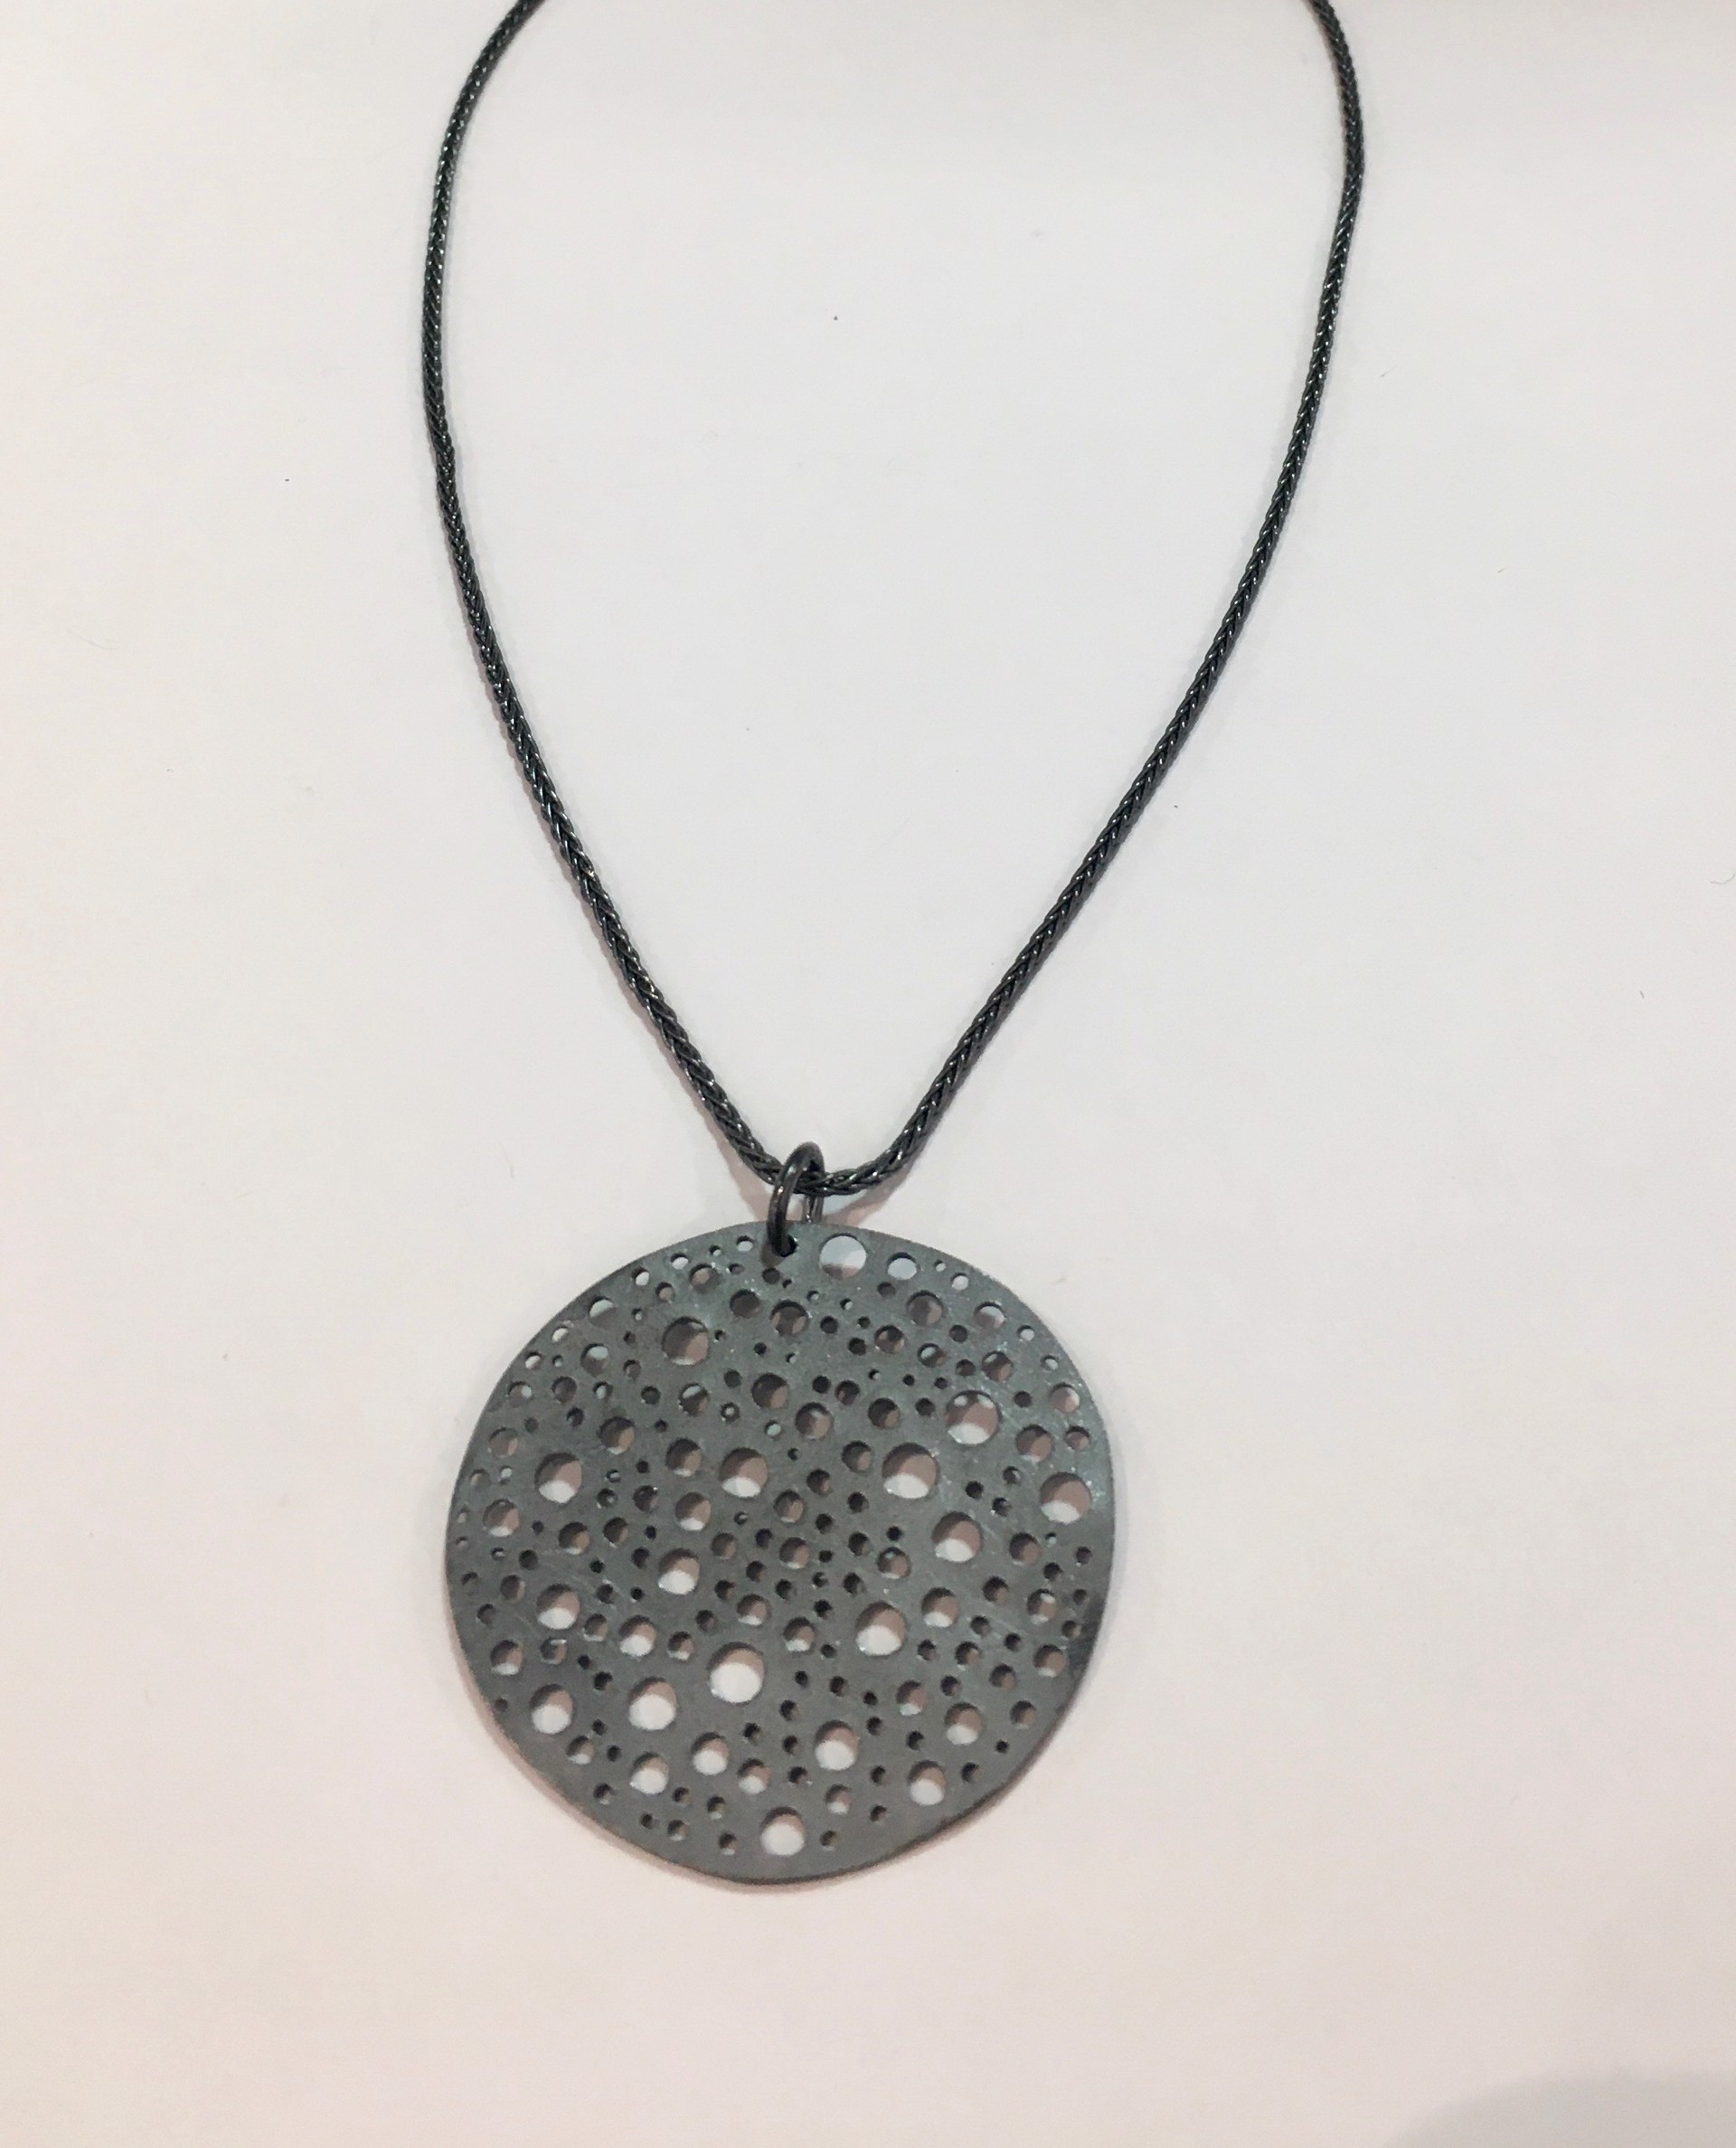 Oxidized Pendant and Chain by DAHLIA KANNER